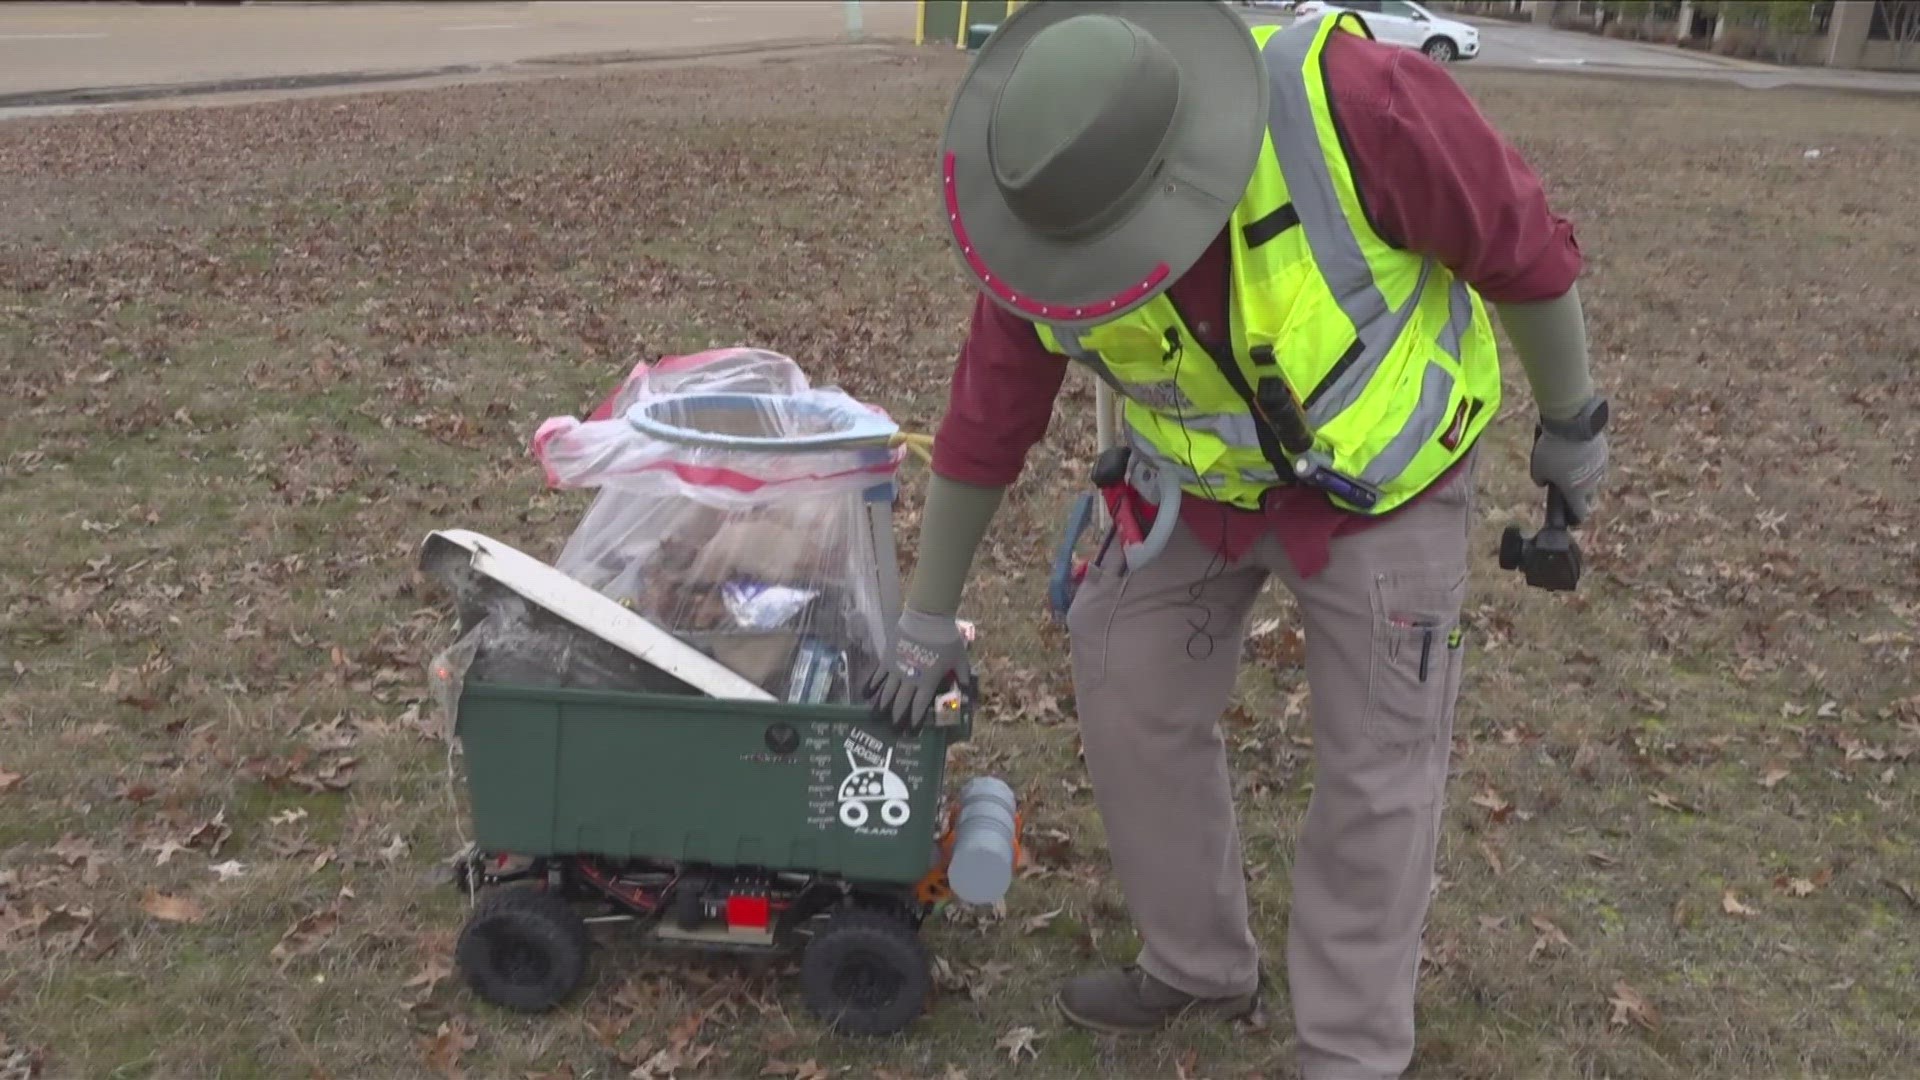 The creator of the remote-controlled robots, called Litter Buggies, gained a massive social media following from his cleanup efforts.